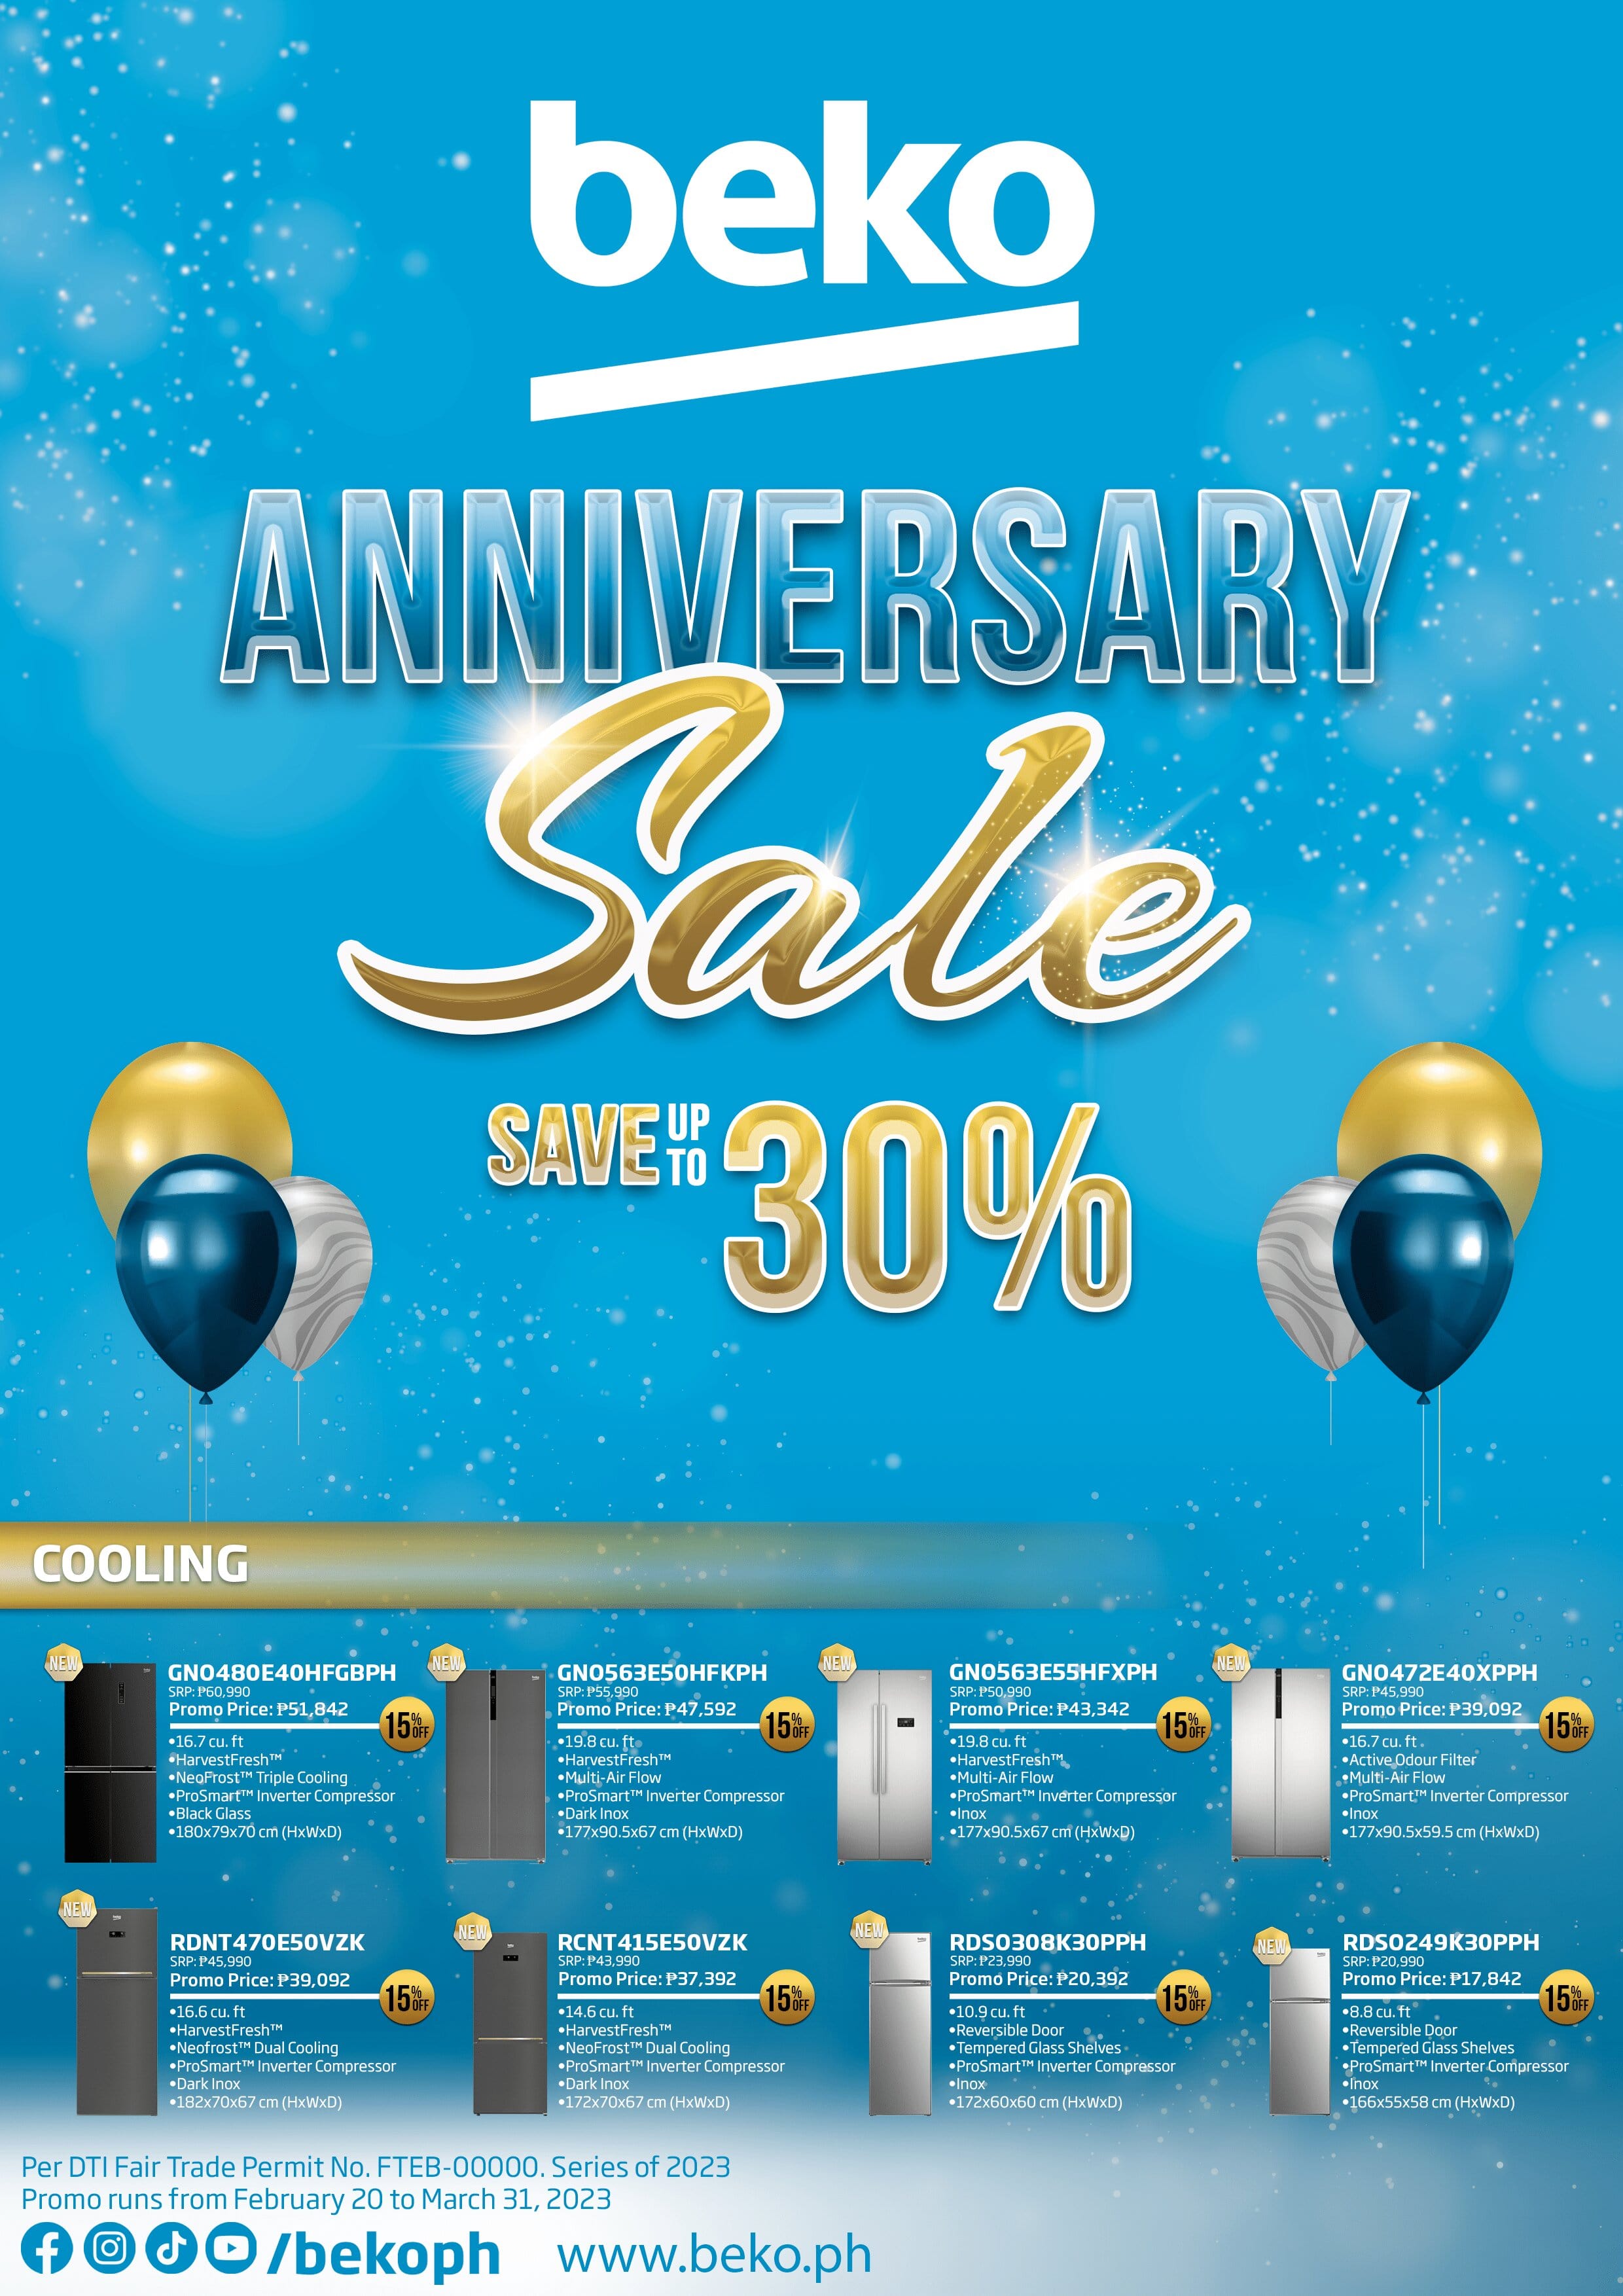 Watch Out As Beko Celebrates Its Anniversary This Month With Exciting Discount Offers